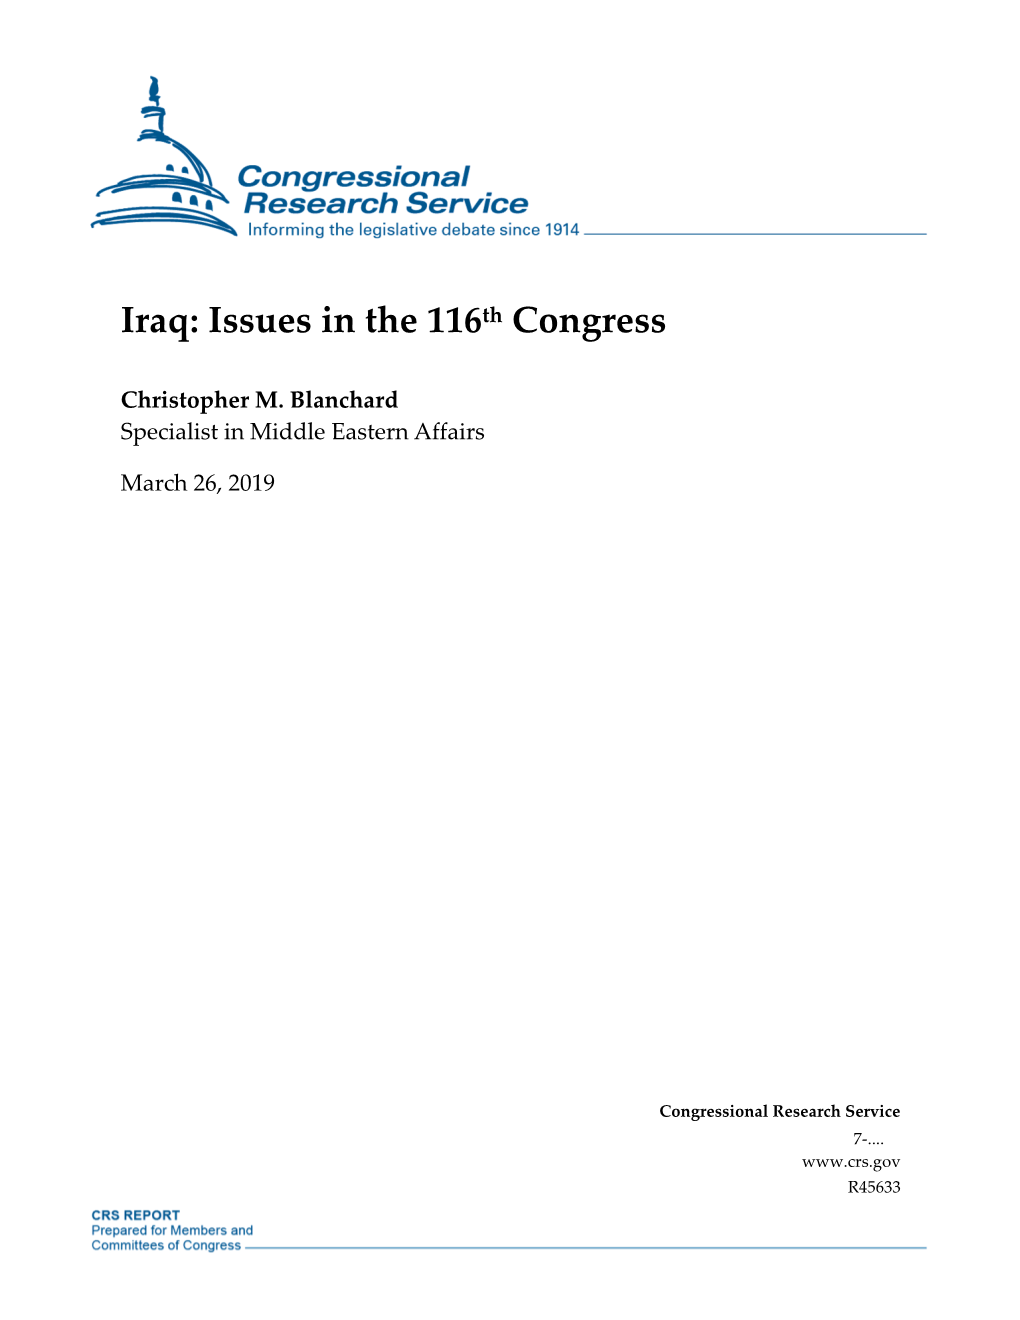 Iraq: Issues in the 116Th Congress